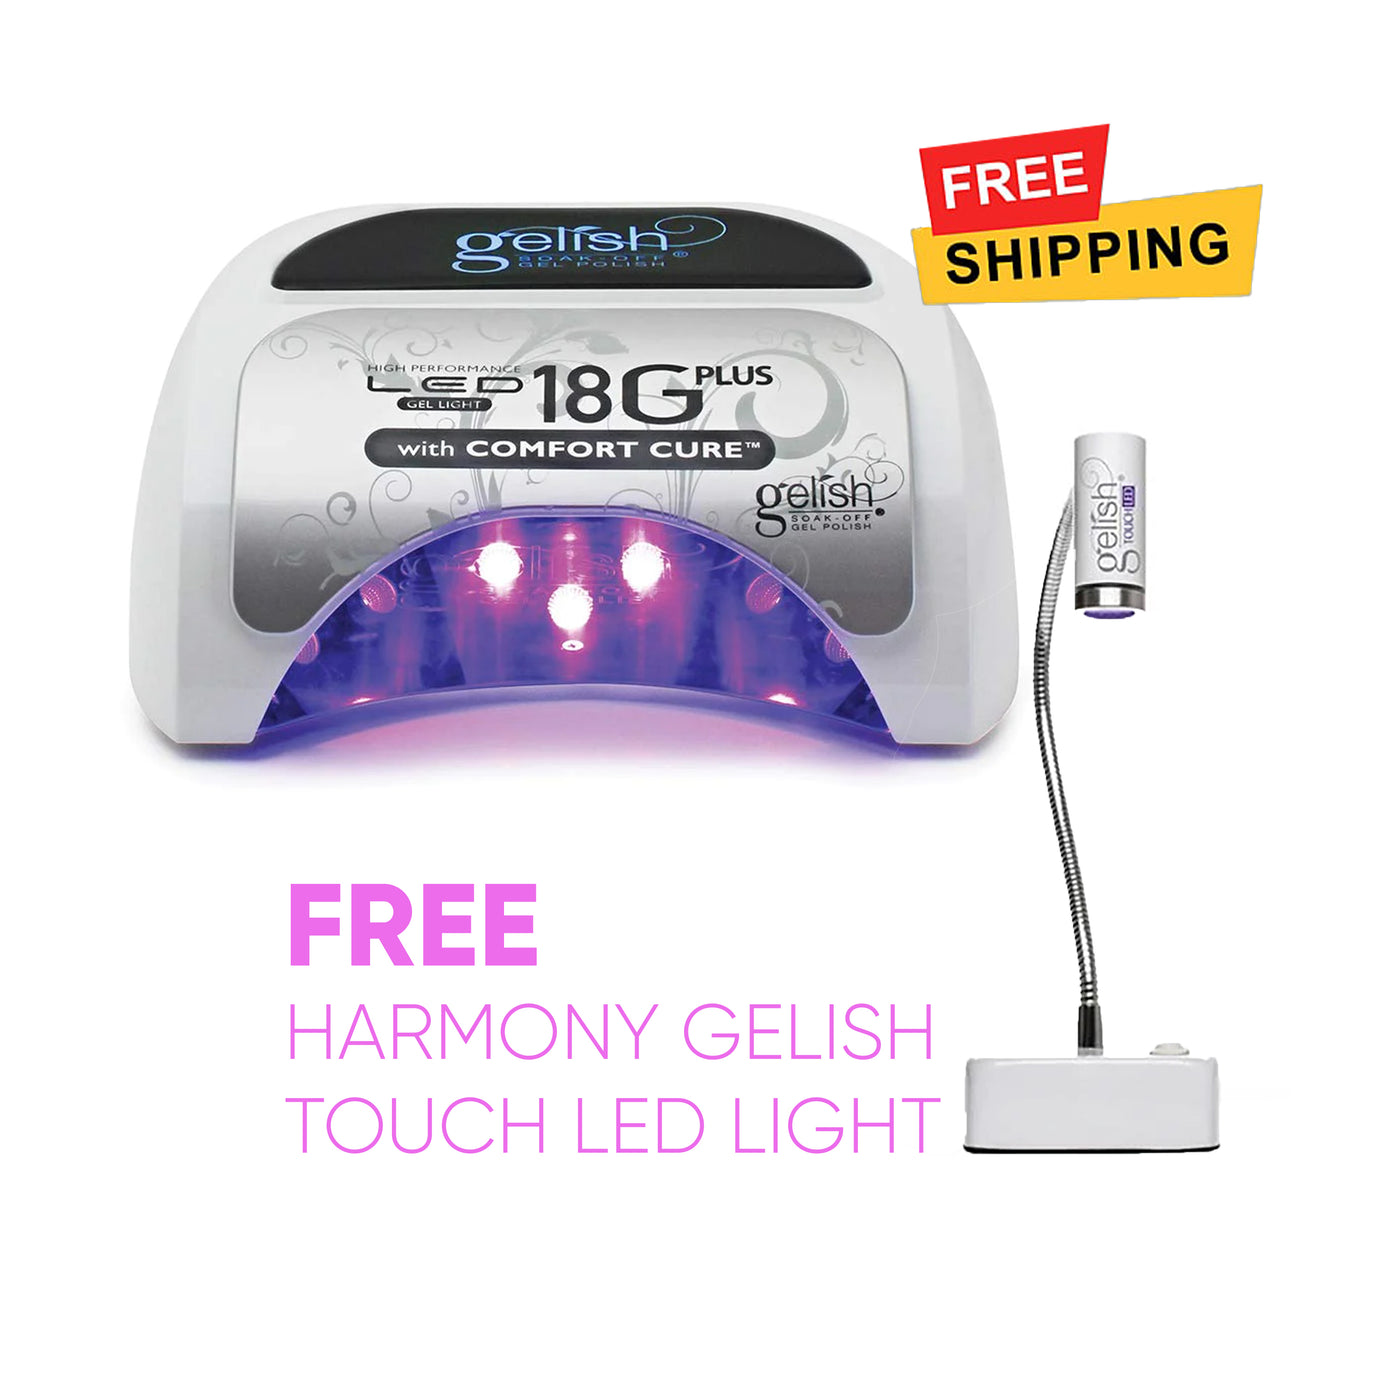 HARMONY GELISH - 18G Plus LED Lamp w/Comfort Cure with FREE Touch LED LIGHT